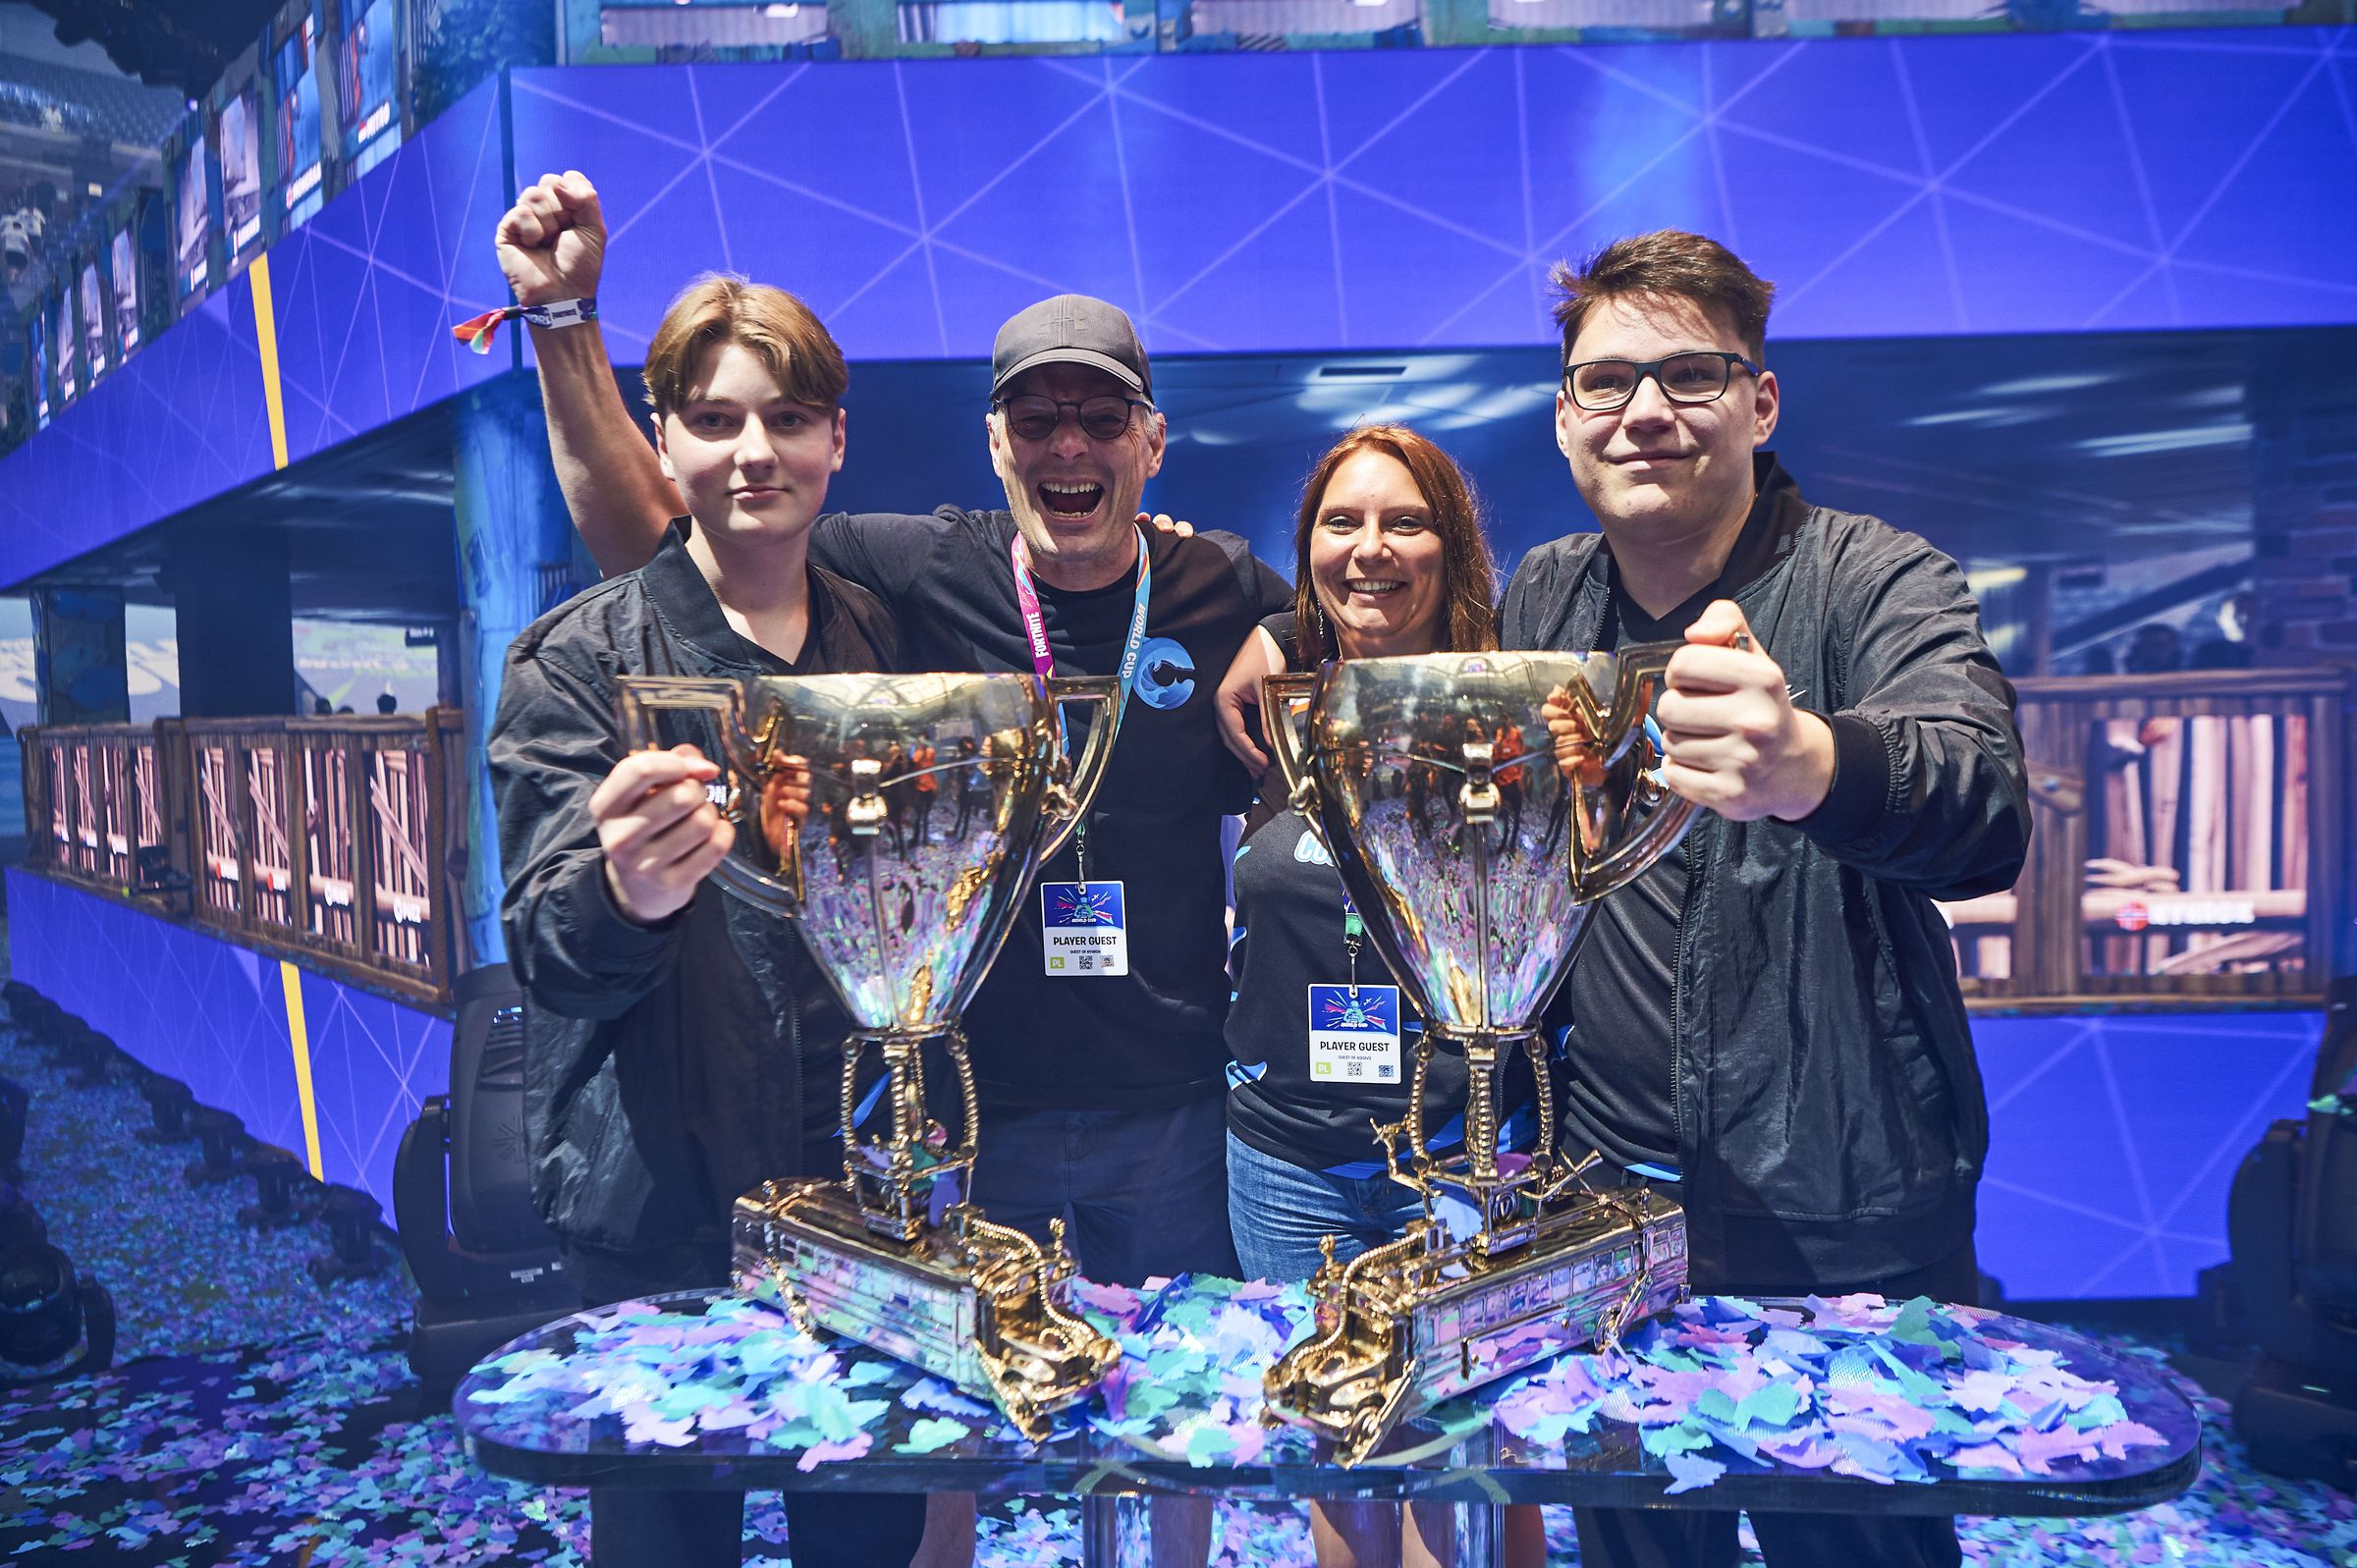 Emil “Nyhrox” Bergquist Pedersen (left) and David “Aqua” Wang (right) holding the Fortnite World Cup duos trophies after claiming victory on Saturday, July 27th. 